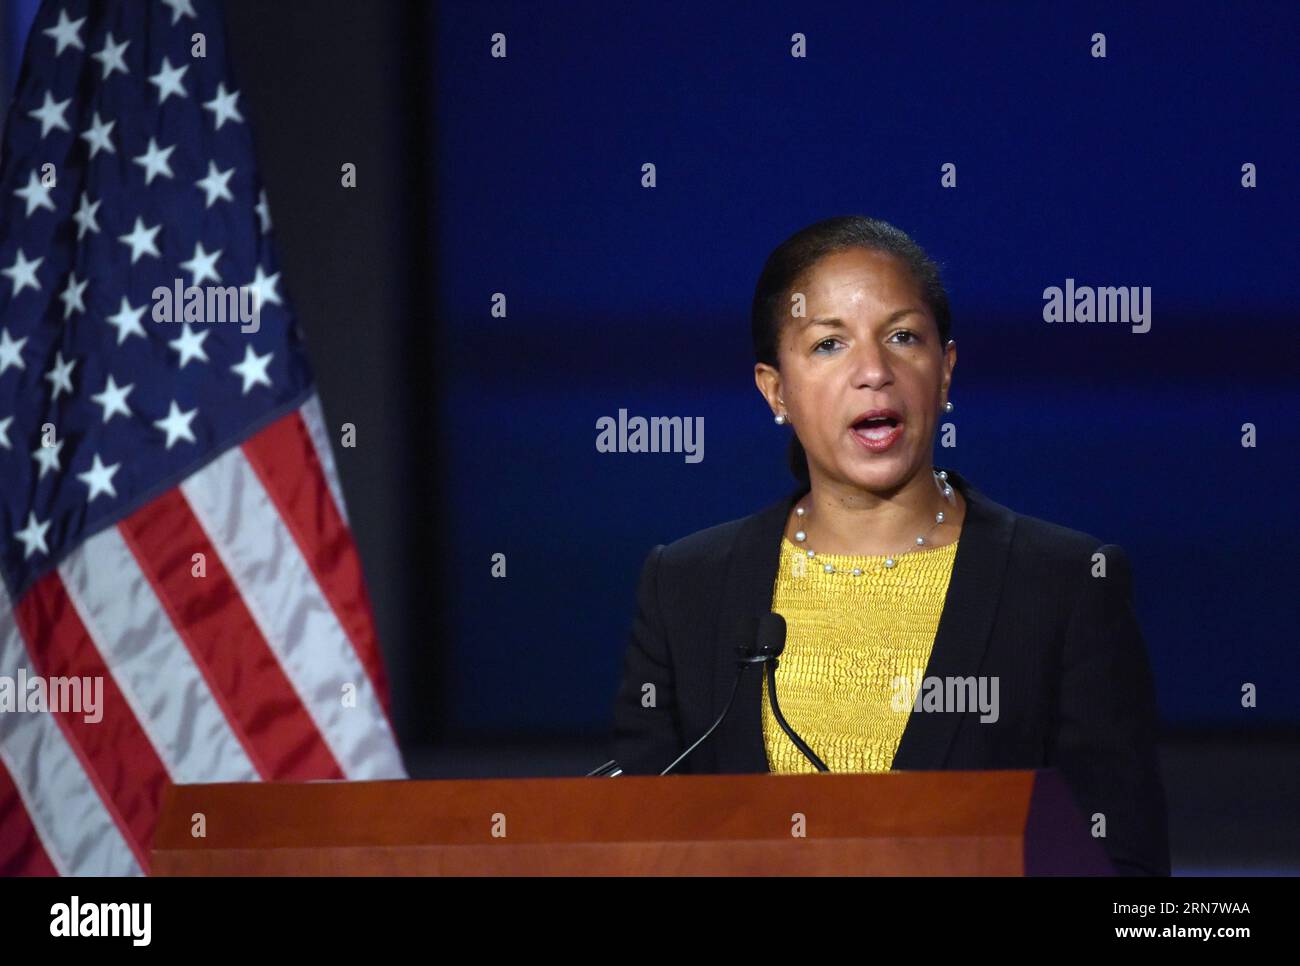 150921 -- WASHINGTON D.C., Sept. 21, 2015 -- U.S. National Security Advisor Susan Rice speaks on the U.S.-China ties at the George Washington University in Washington, D.C., the United States, Sept. 21, 2015. We reject reductive reasoning and lazy rhetoric that says conflict between the U.S. and China is inevitable, even as we ve been tough with China where we disagree, Susan Rice said here in a speech on Monday.  U.S.-WASHINGTON D.C.-CHINA-SUSAN RICE YinxBogu PUBLICATIONxNOTxINxCHN Stock Photo